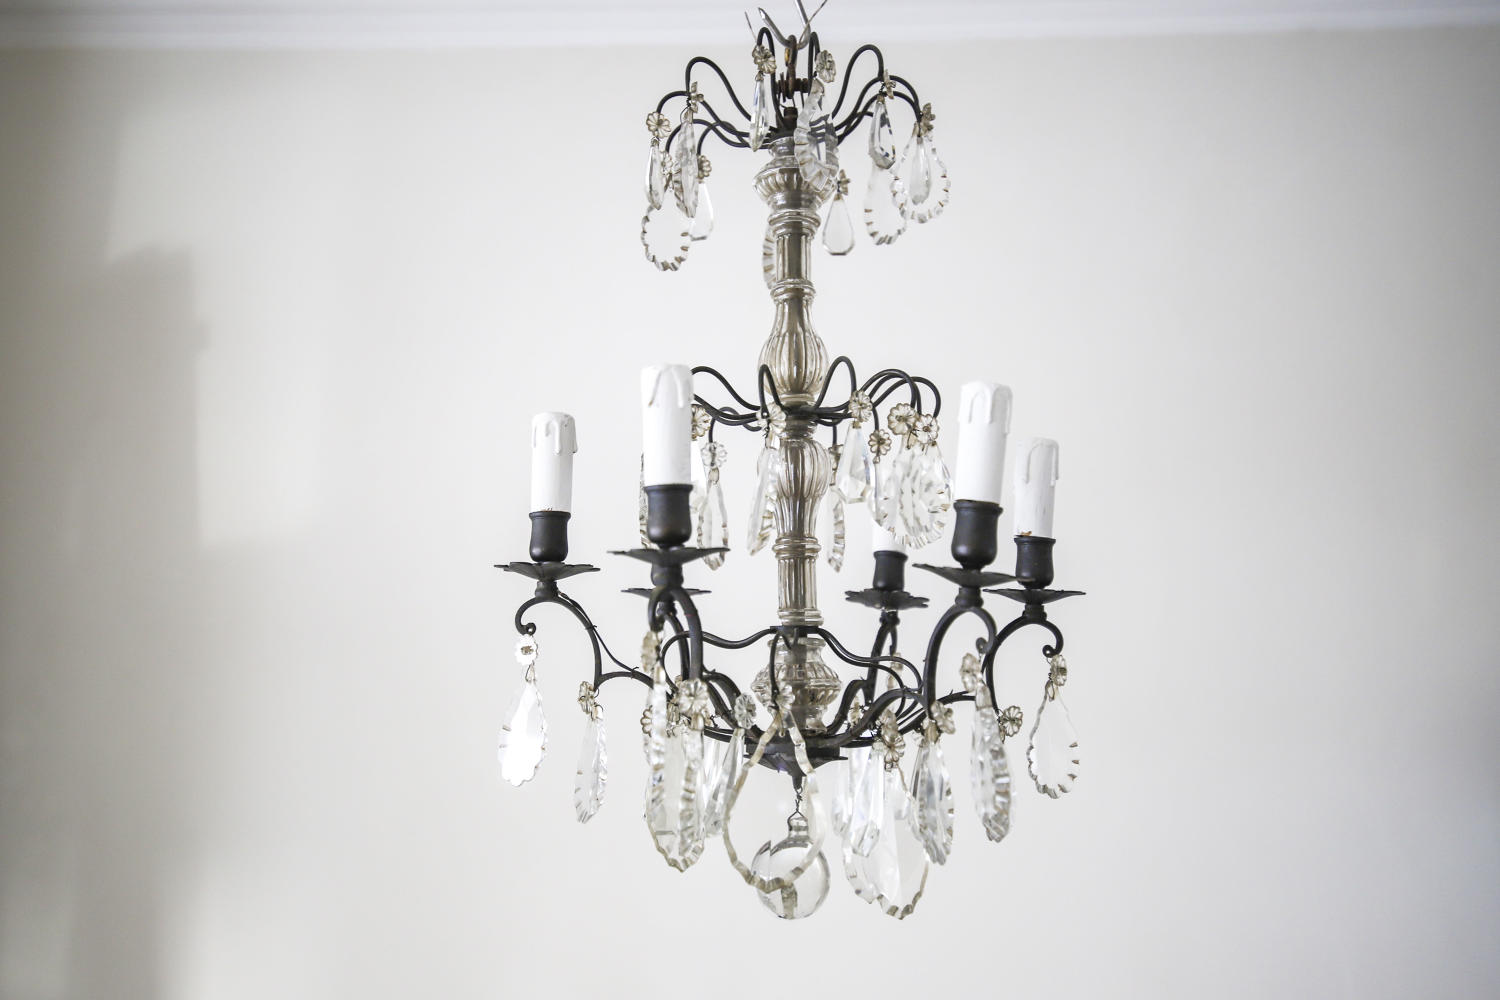 French antique crystal 6 branch chandelier